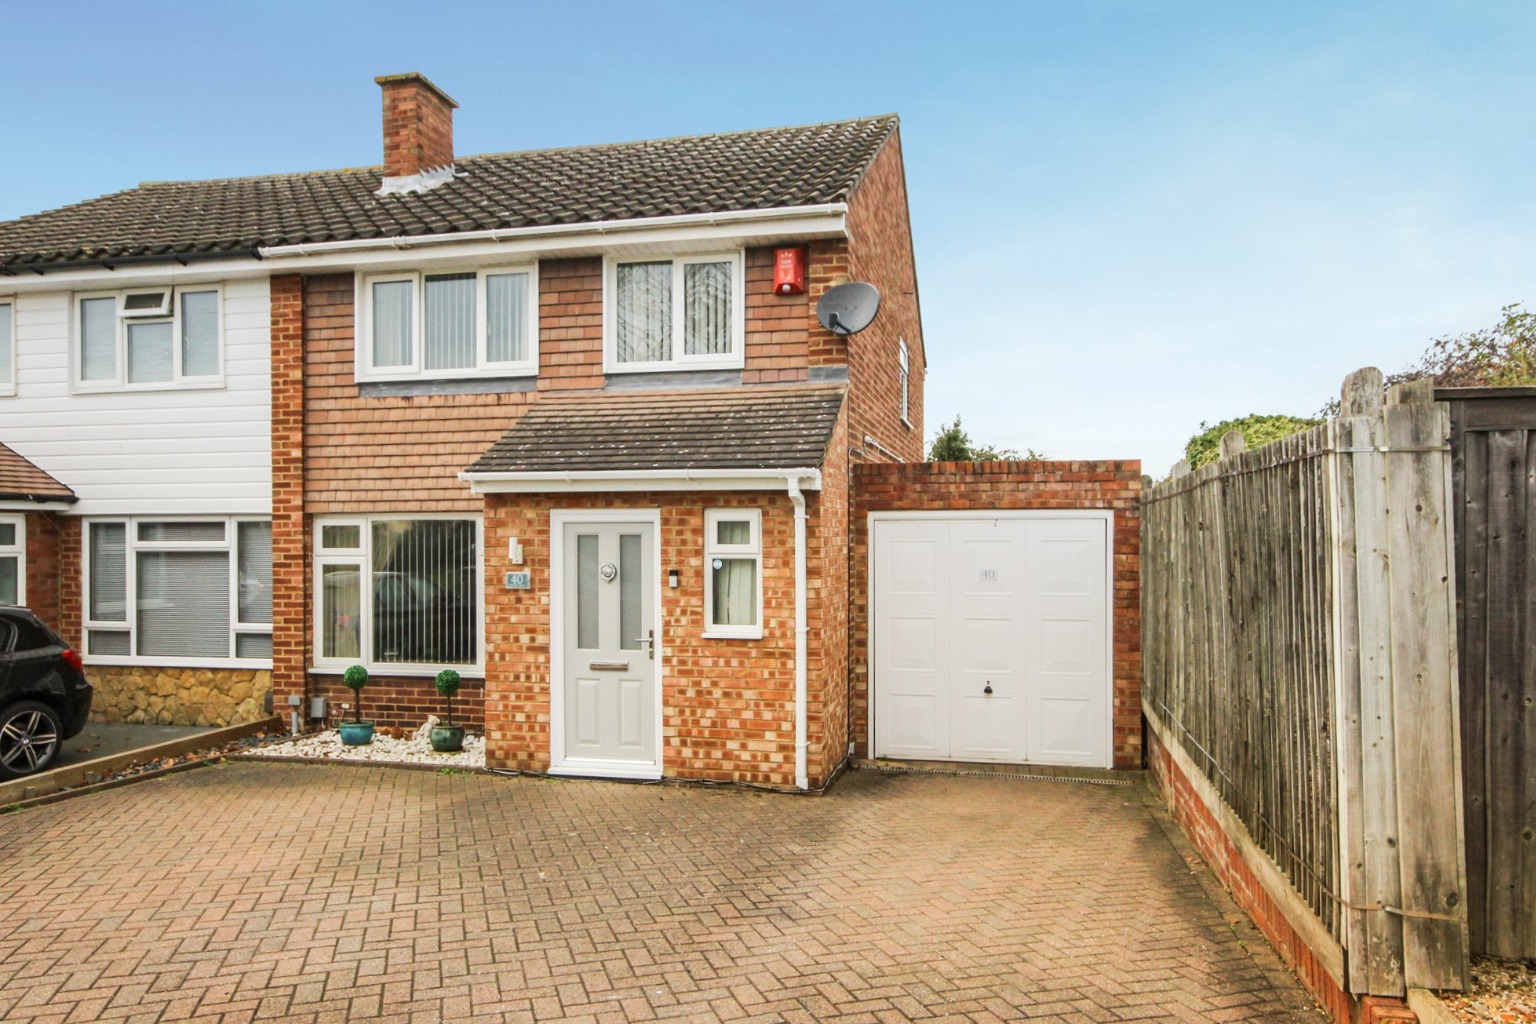 3 bed semi-detached house for sale in Pennine Road, Bedford - Property Image 1